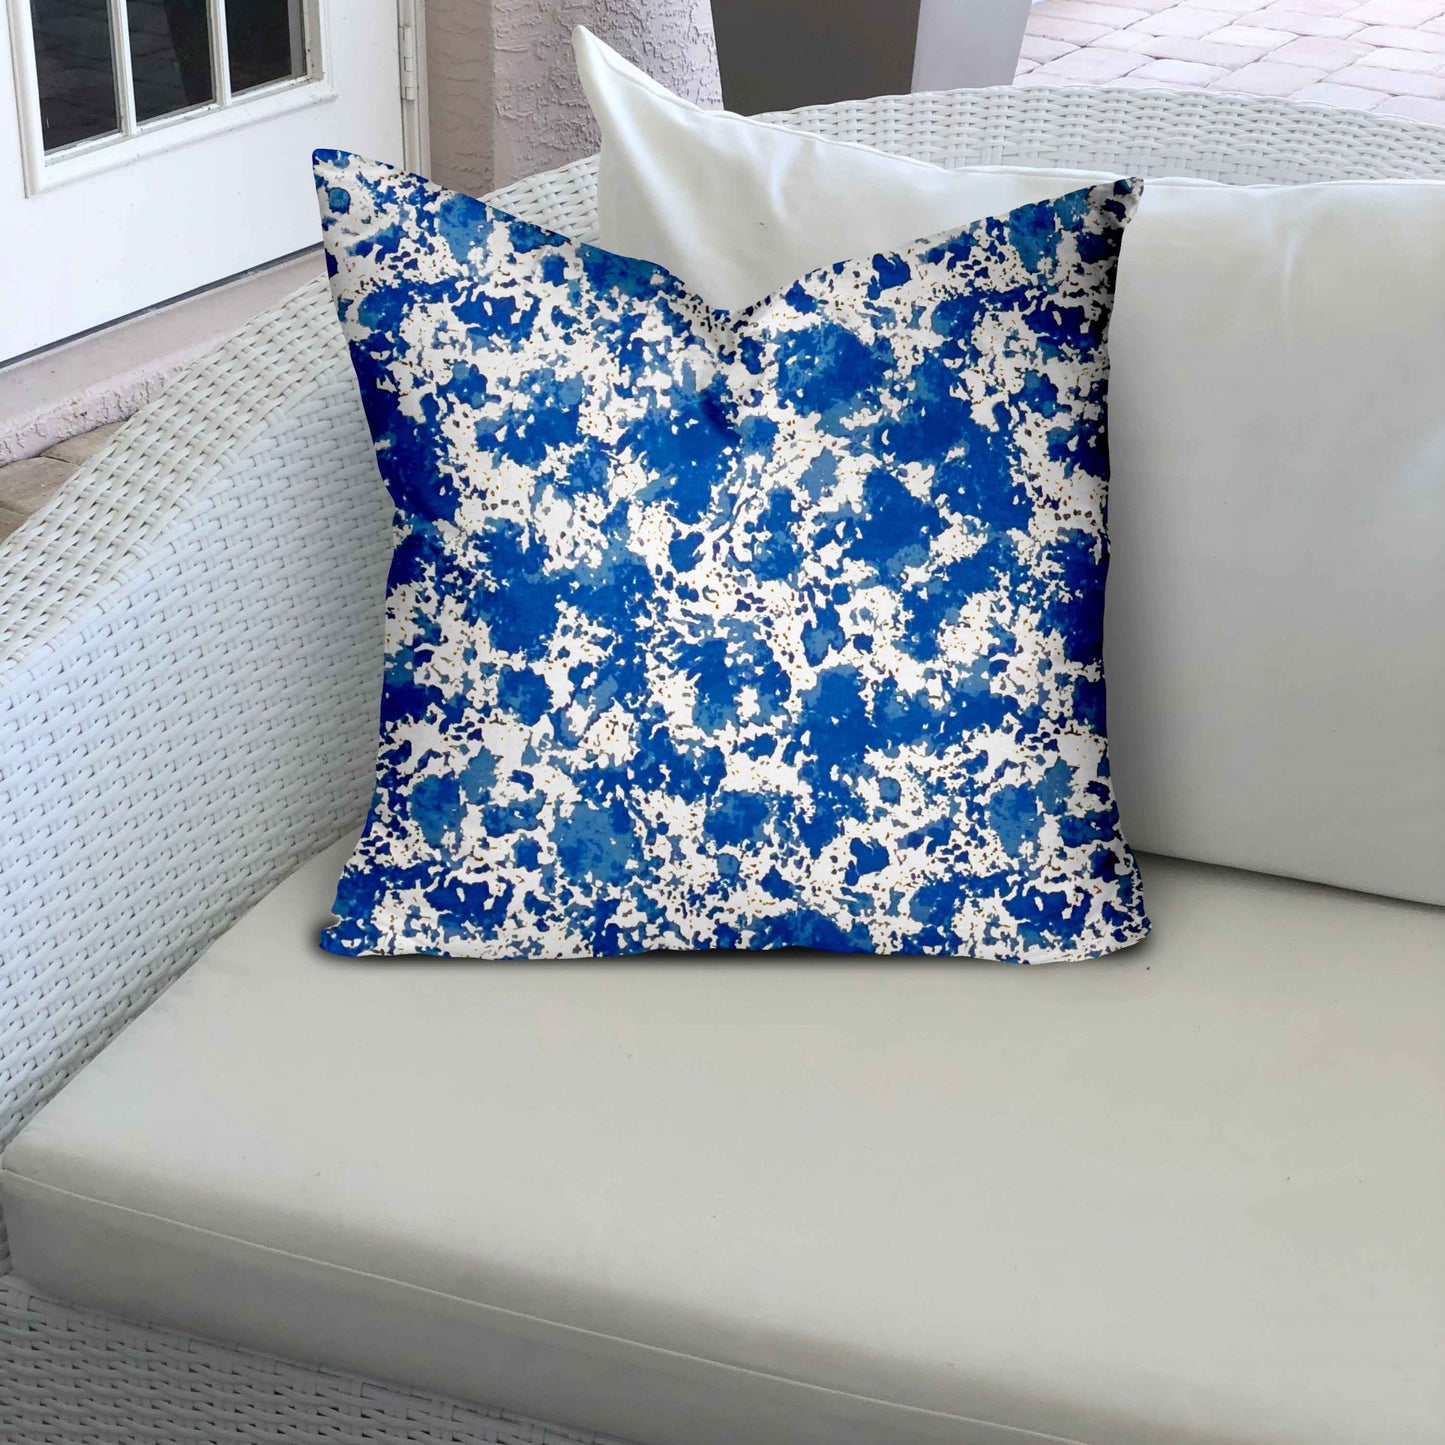 36" X 36" Blue And White Enveloped Coastal Throw Indoor Outdoor Pillow Cover